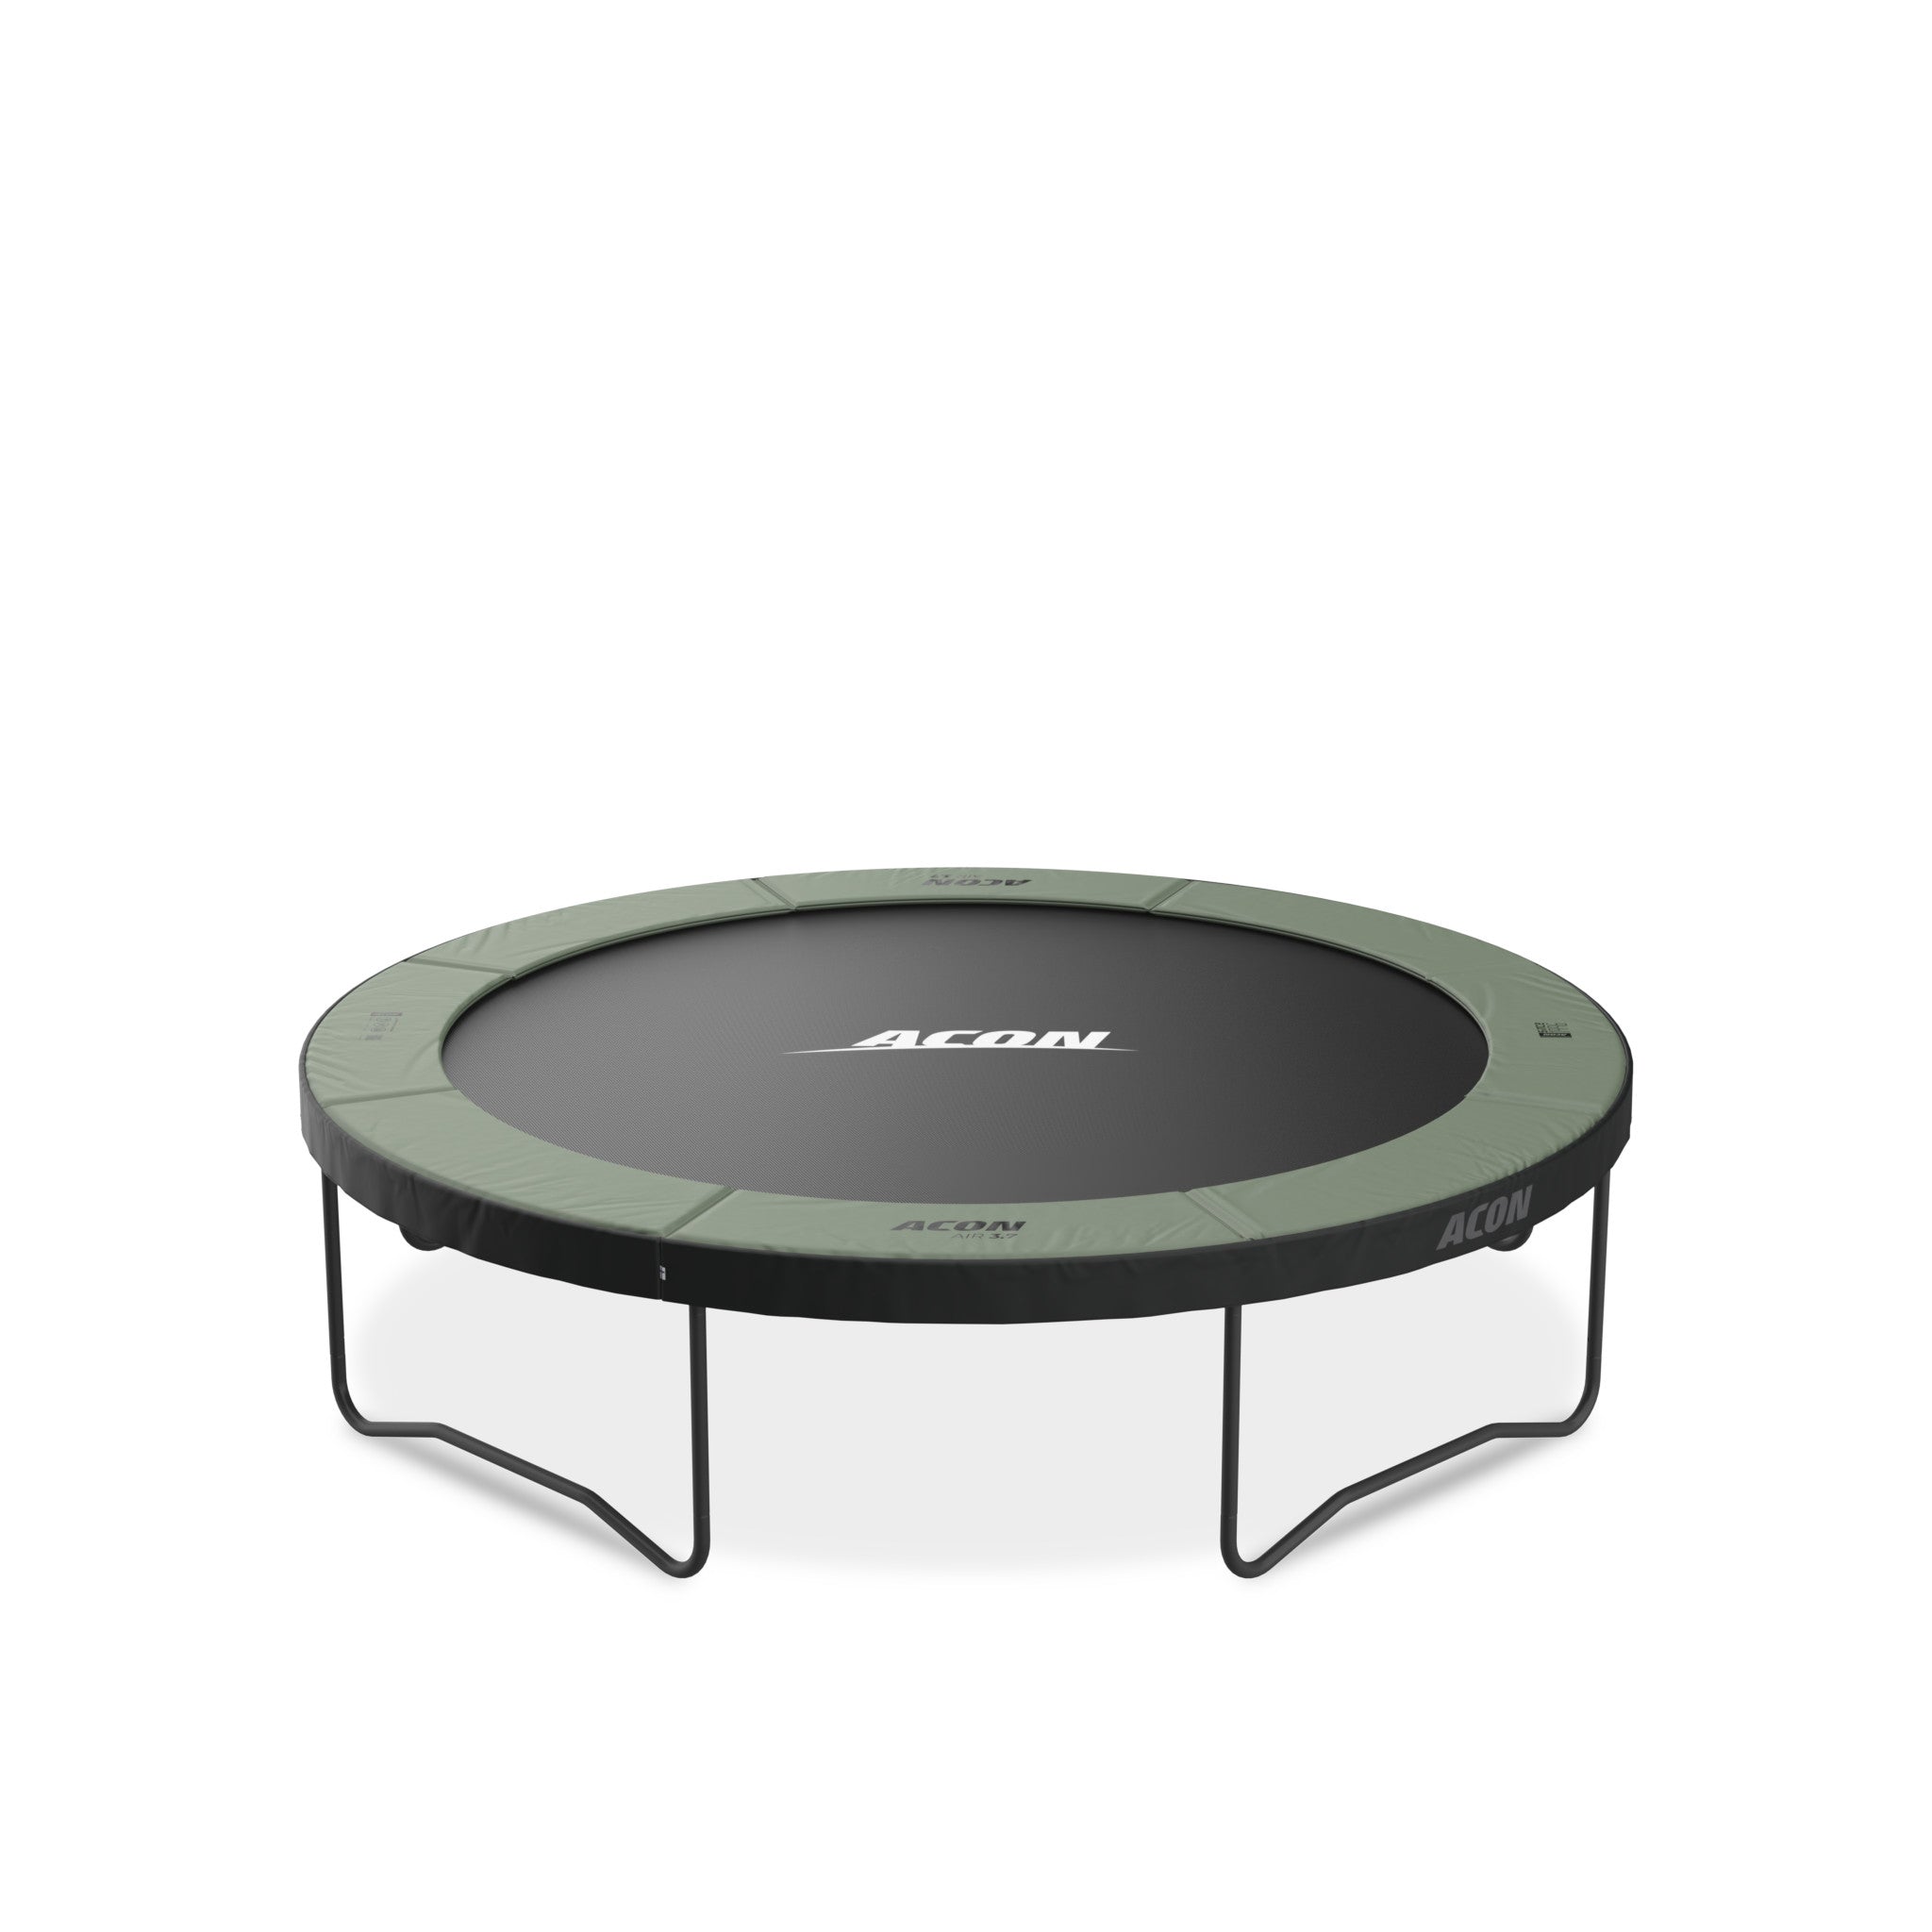 Air 3.7 round trampoline 12ft. | Order yours now! – Acon EU